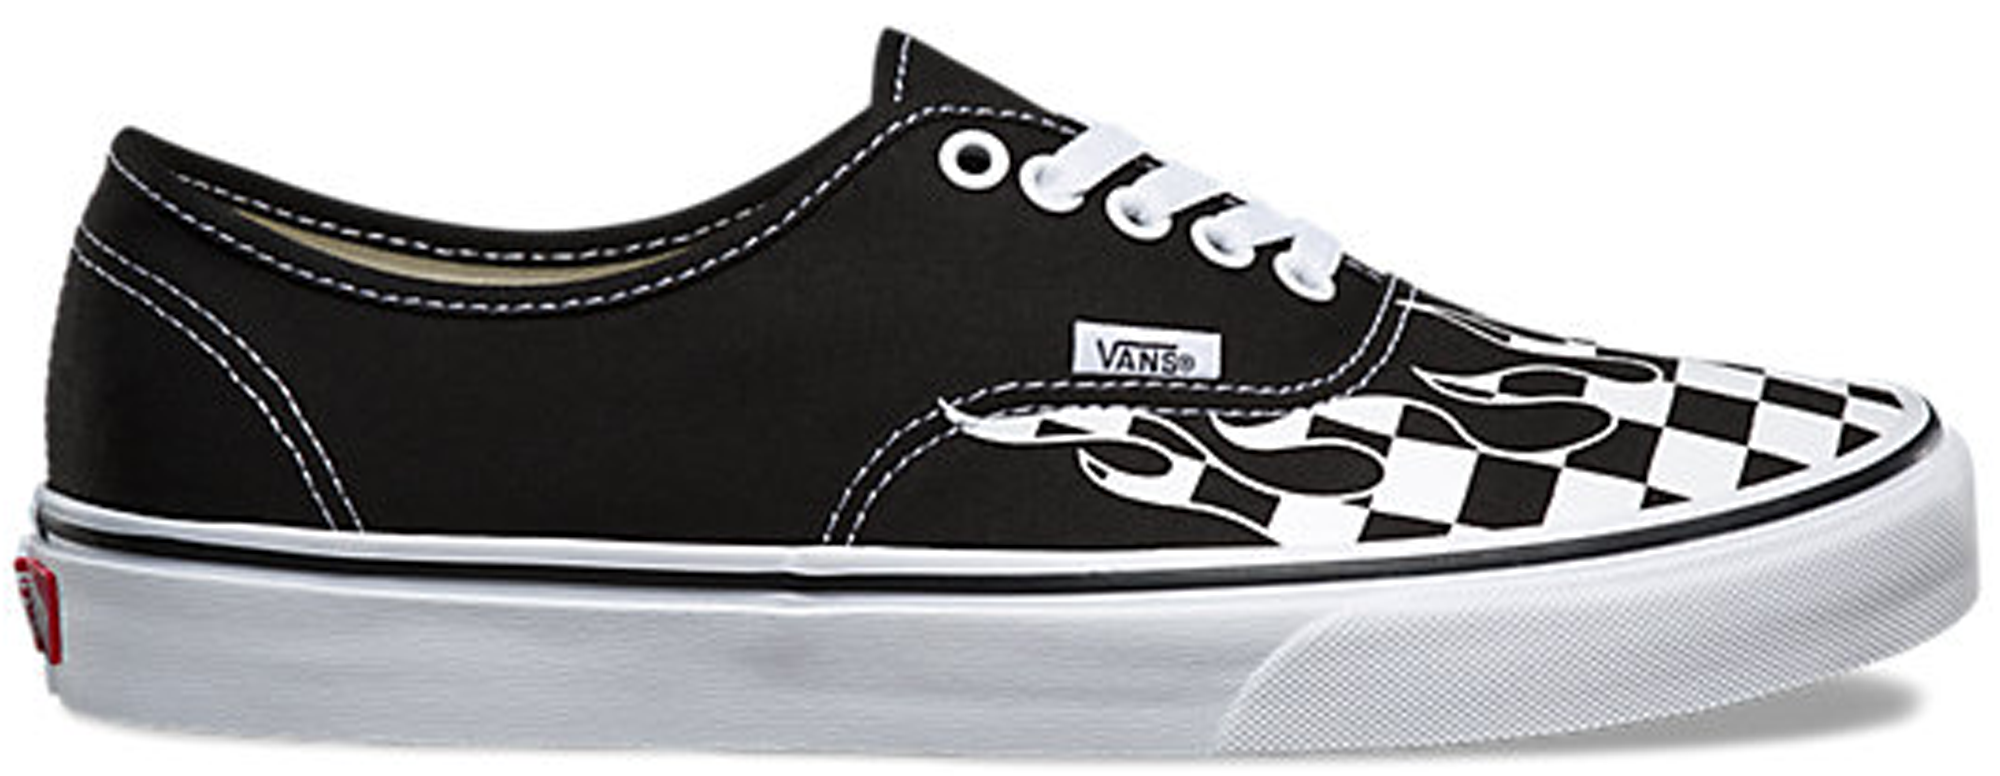 vans authentic checkerboard flame black & white skate shoes